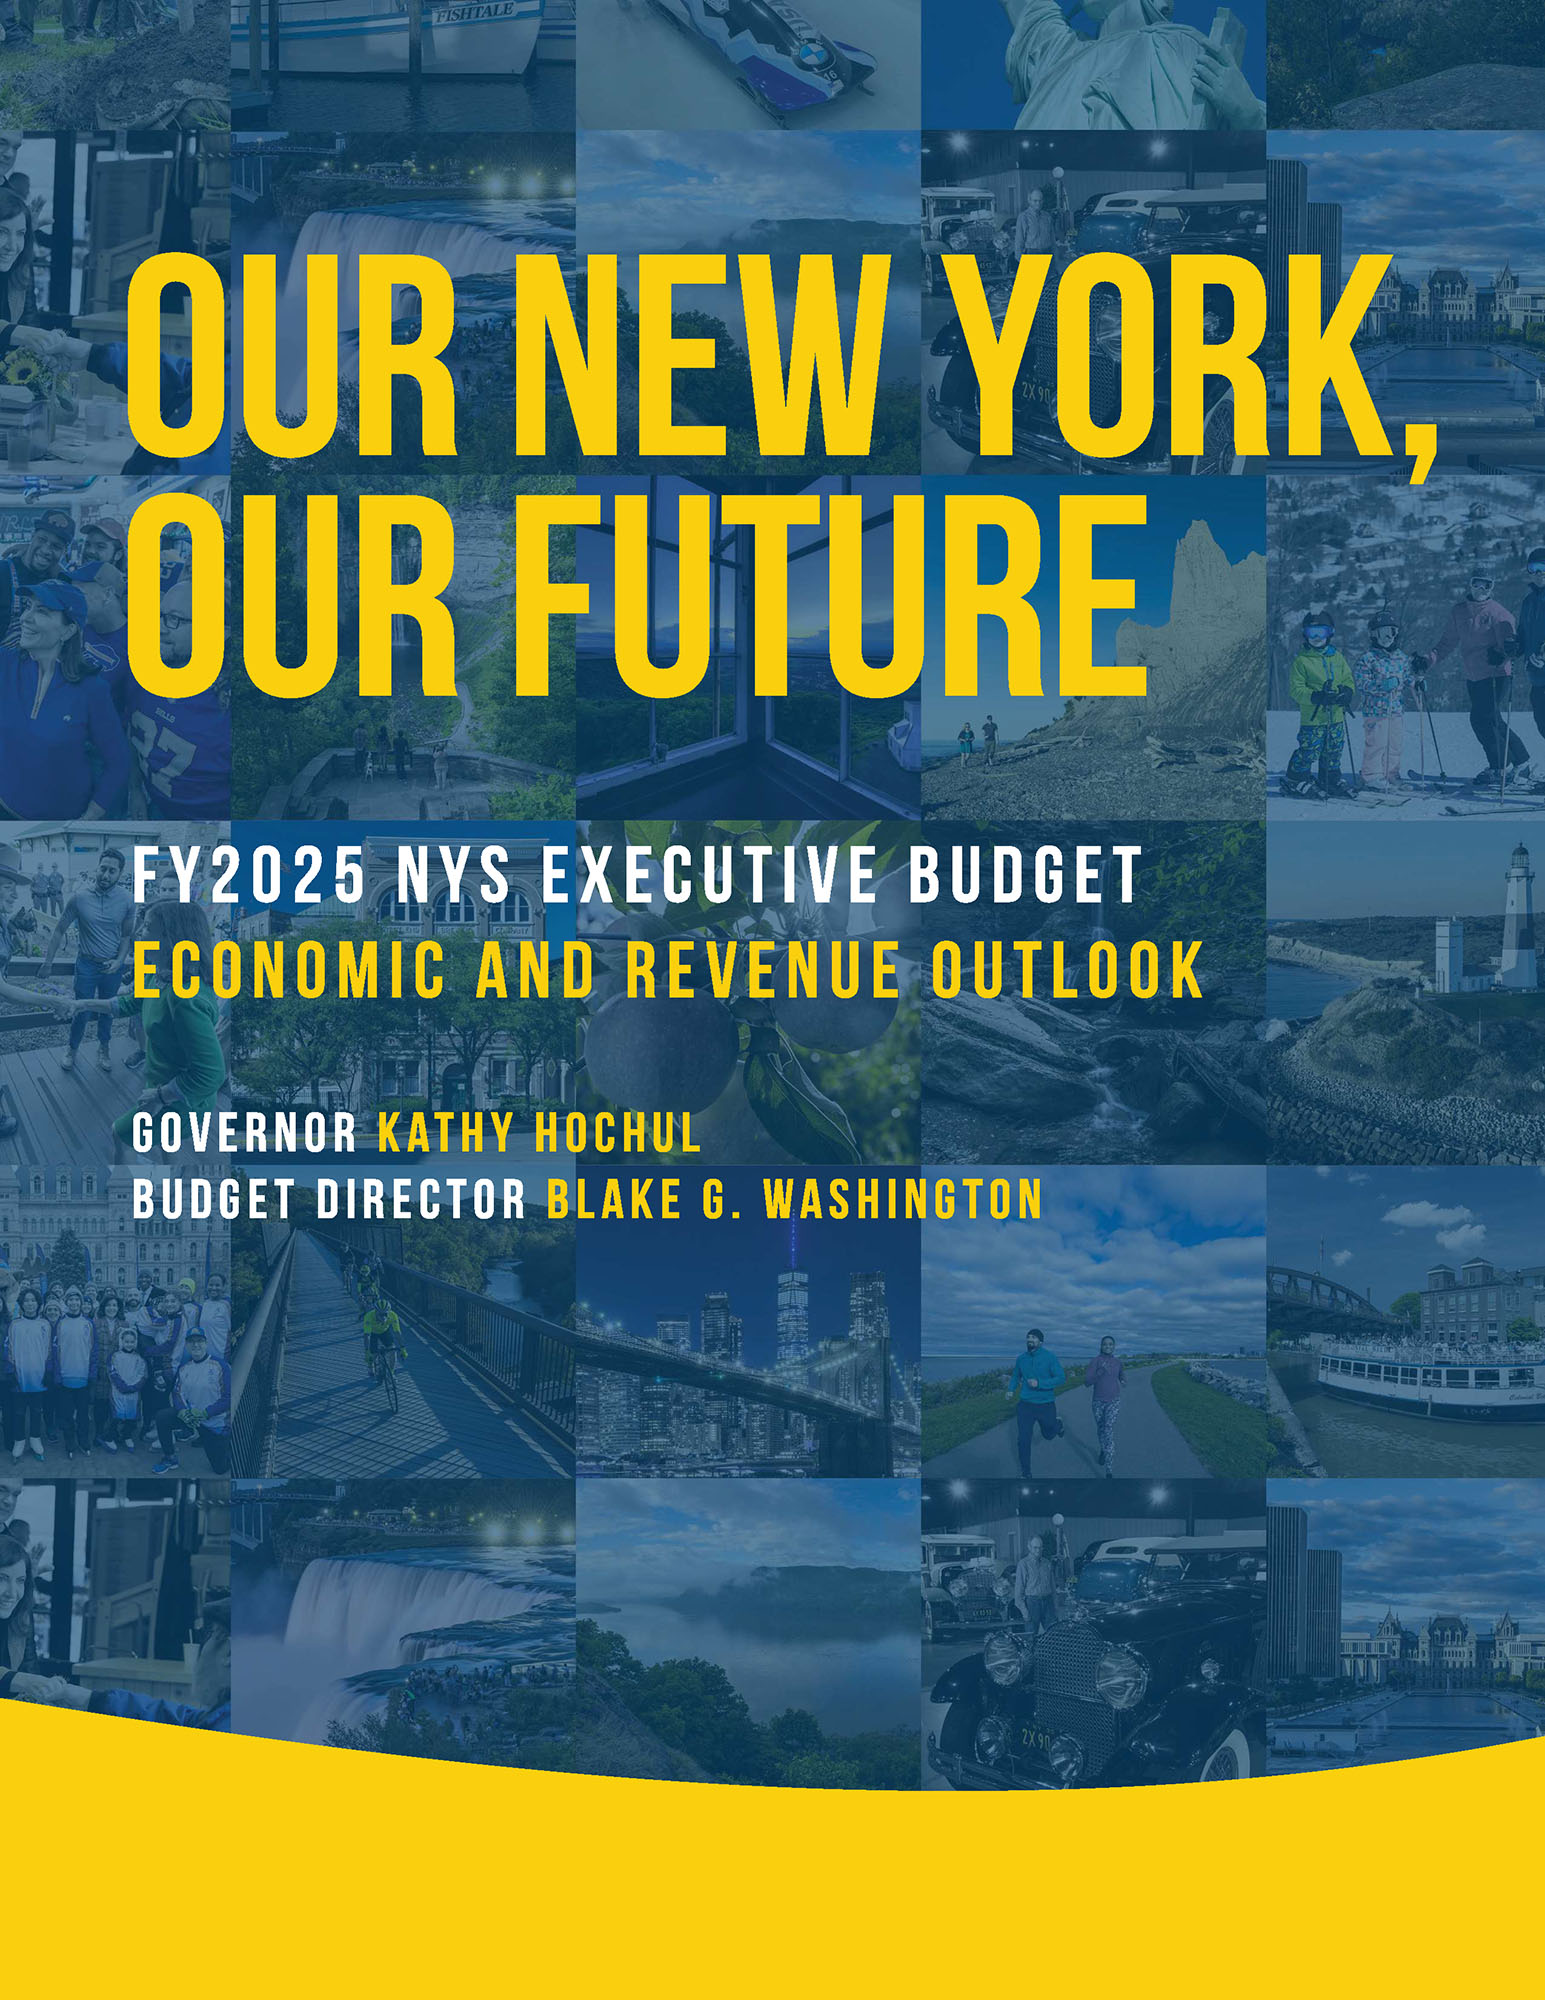 FY 2025 Economic and Revenue Outlook Cover